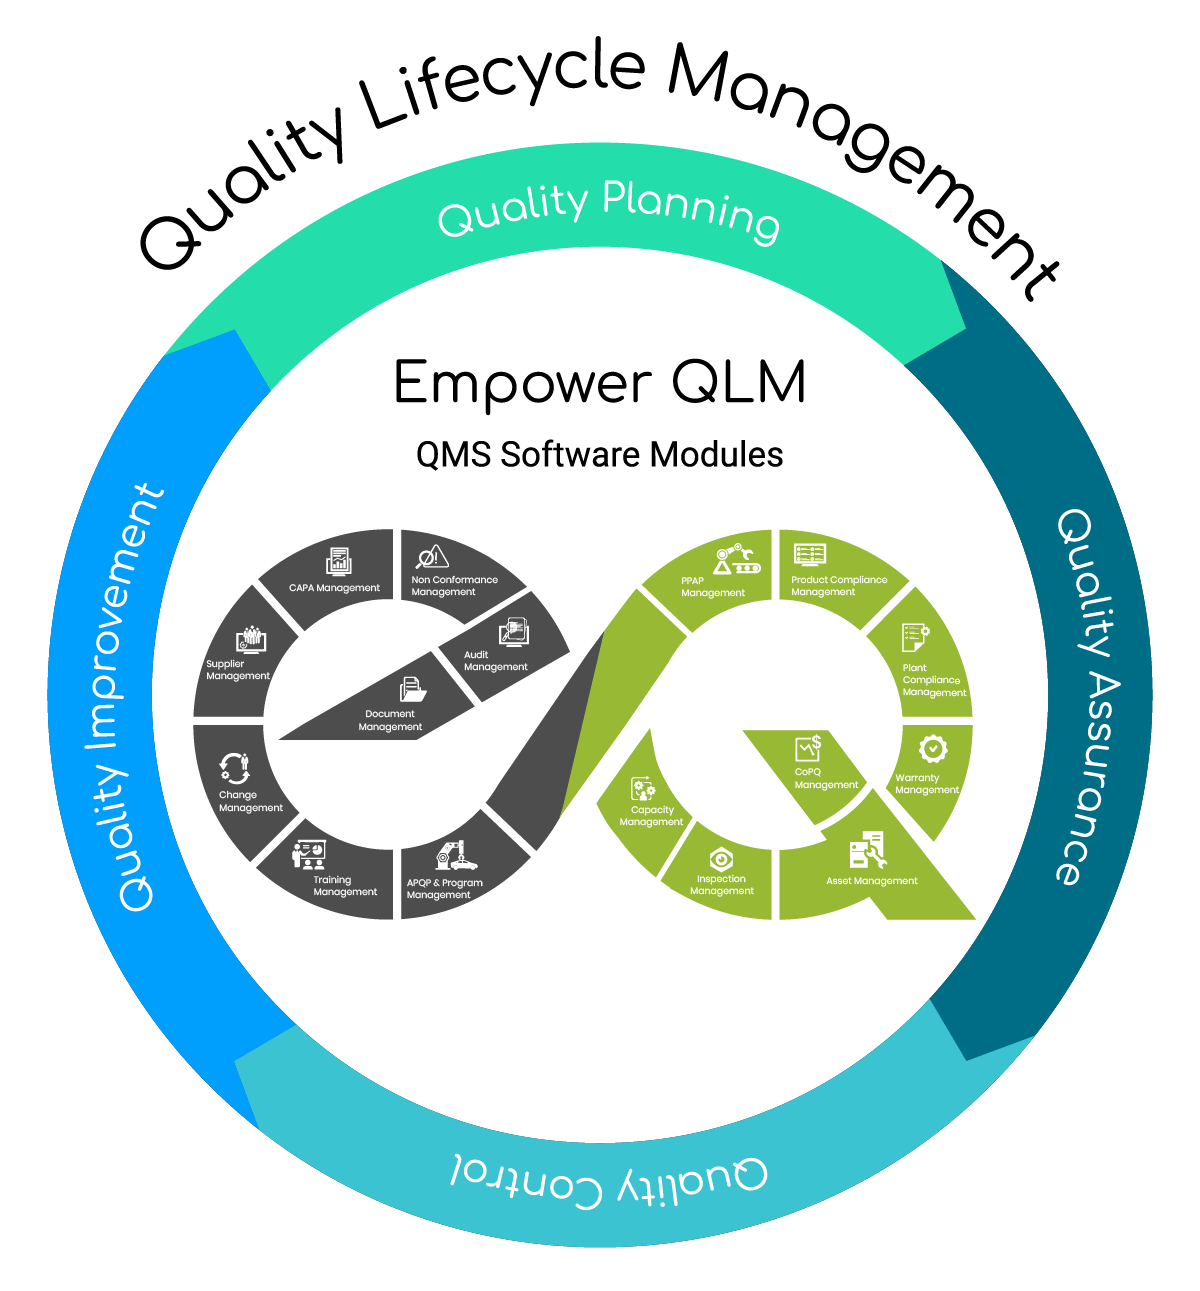 Quality Lifecycle Management Diagram